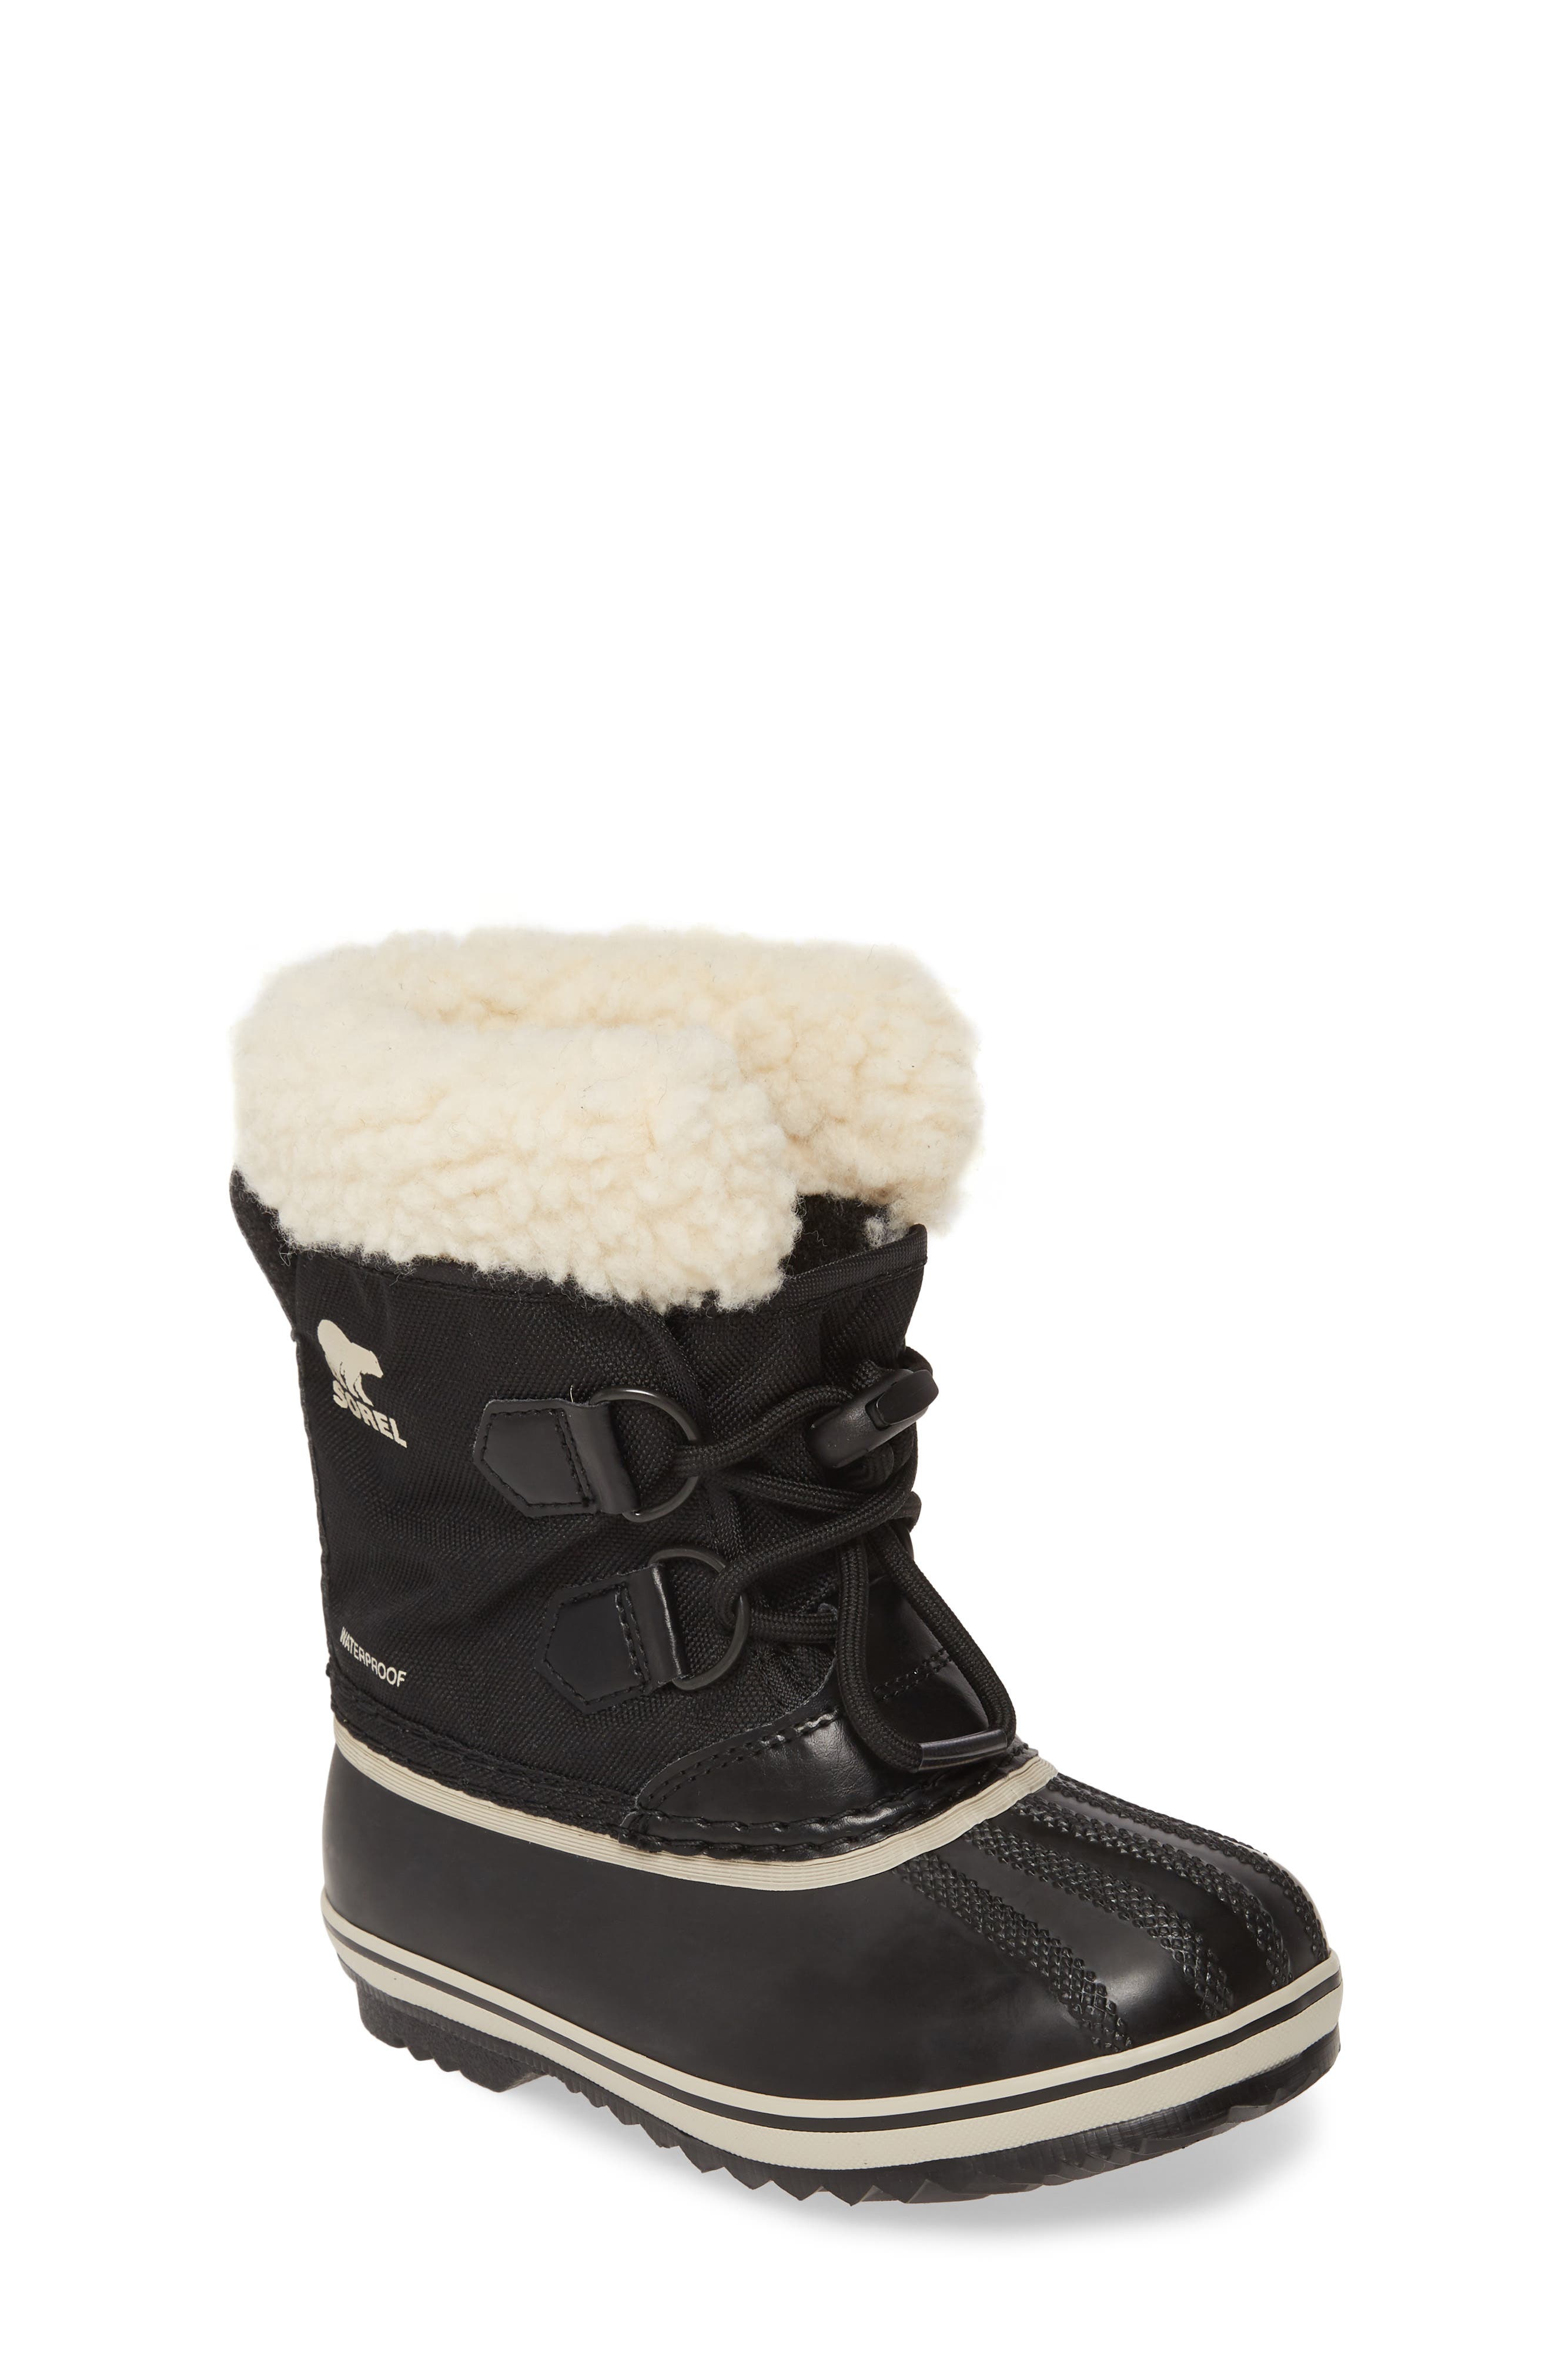 Sorel Yoot Pac TP MS Cold Weather Boot Toddler/Little Kid/Big Kid